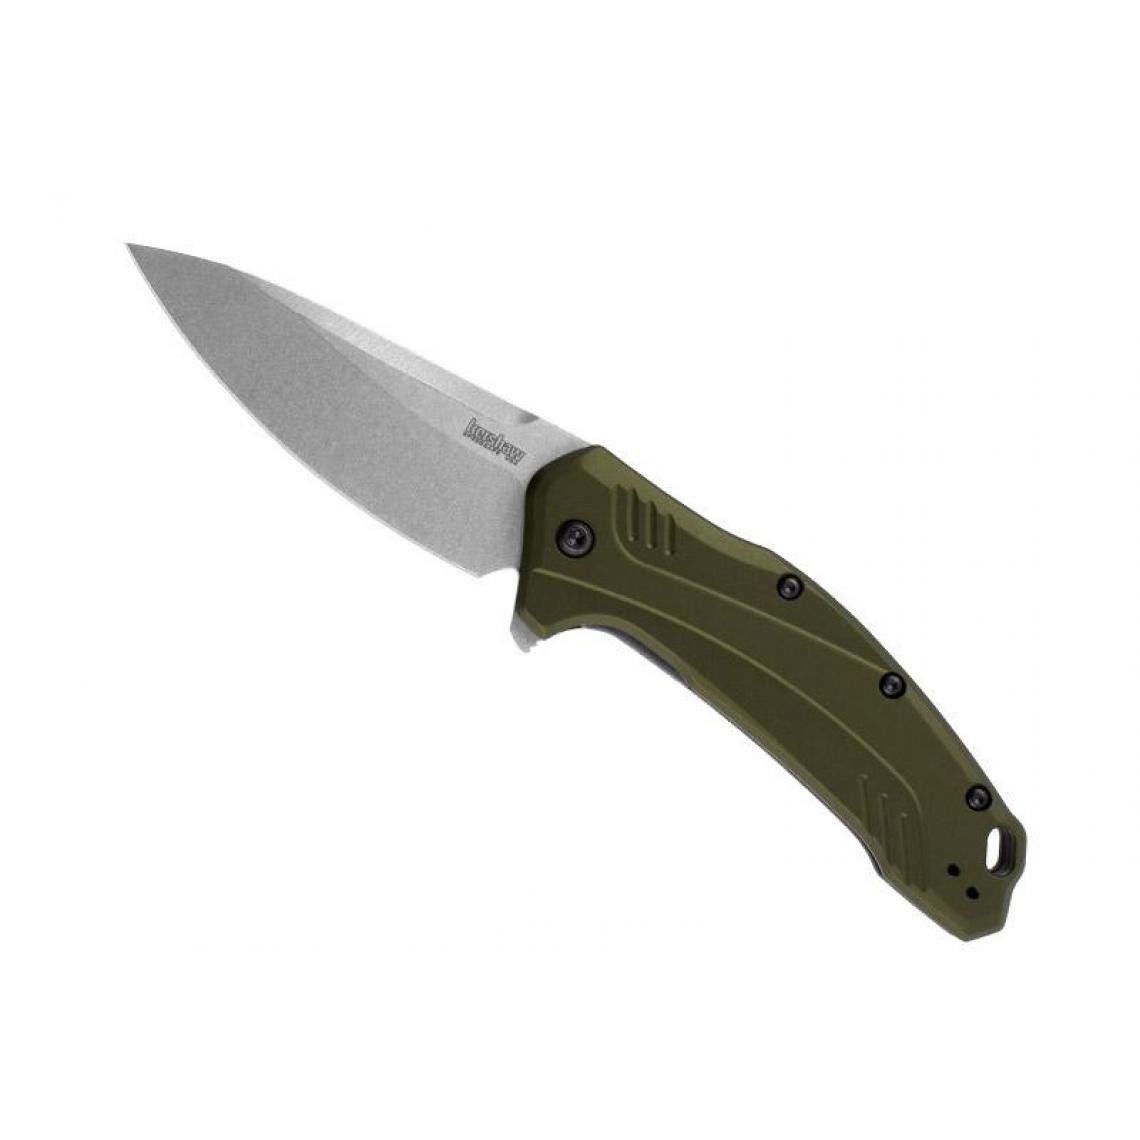 Divers Marques - KERSHAW - KS.1776OLSW - COUTEAU KERSHAW LINK OLIVE - Outils de coupe